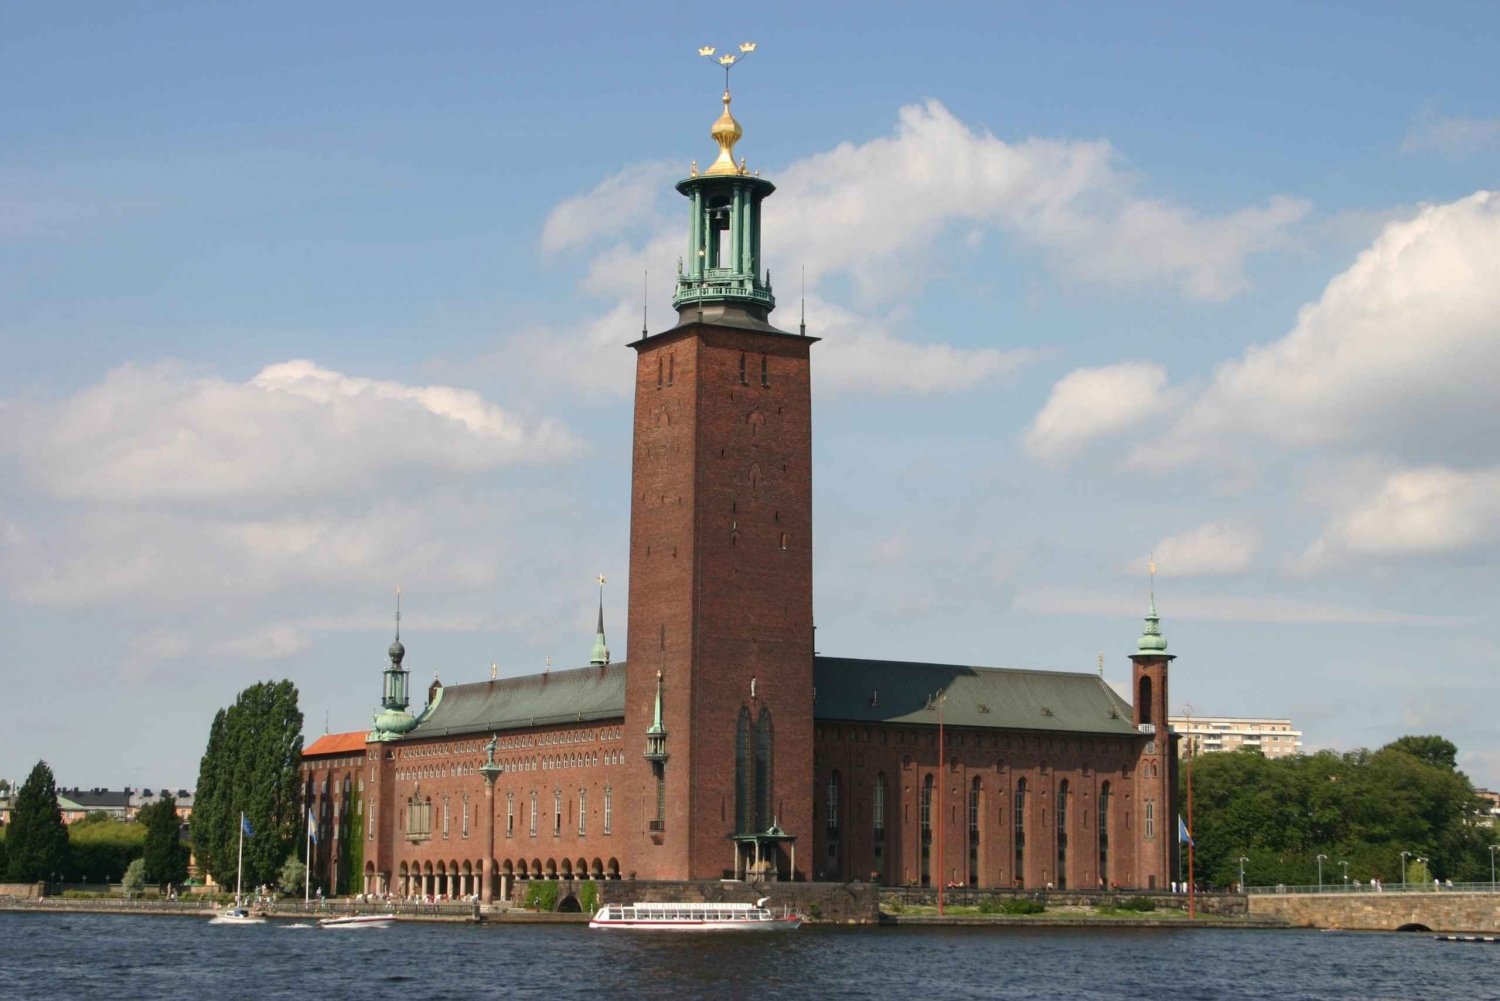 Stockholm Must See: City Hall, Gamla Stan and Vasa Museum